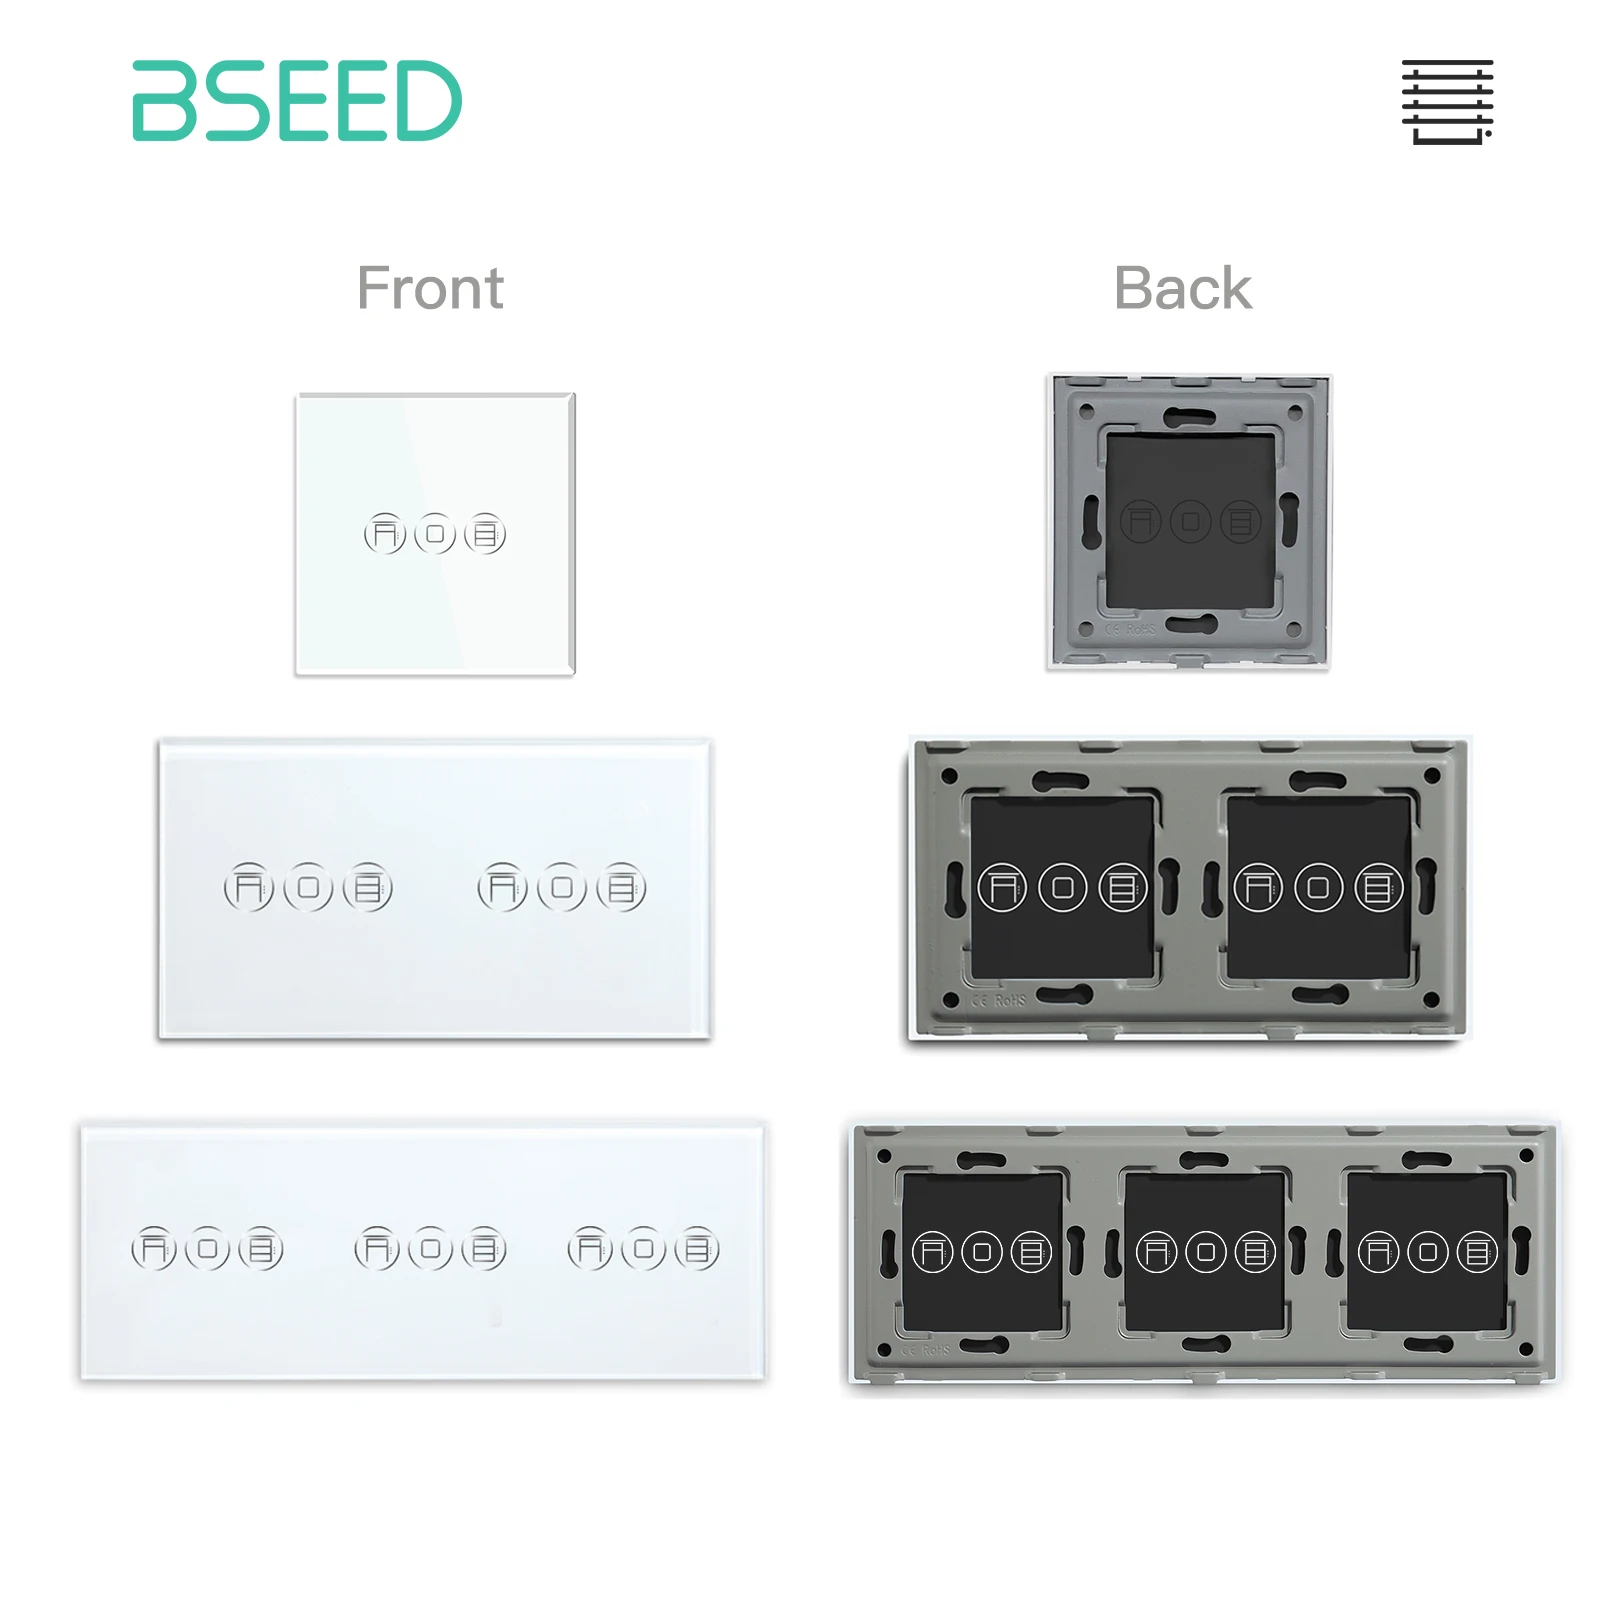 BSEED Wall Glass Panel For Touch Smart Roller Shutter Blinds Metal Frame Included EU Standard DIY Parts Only